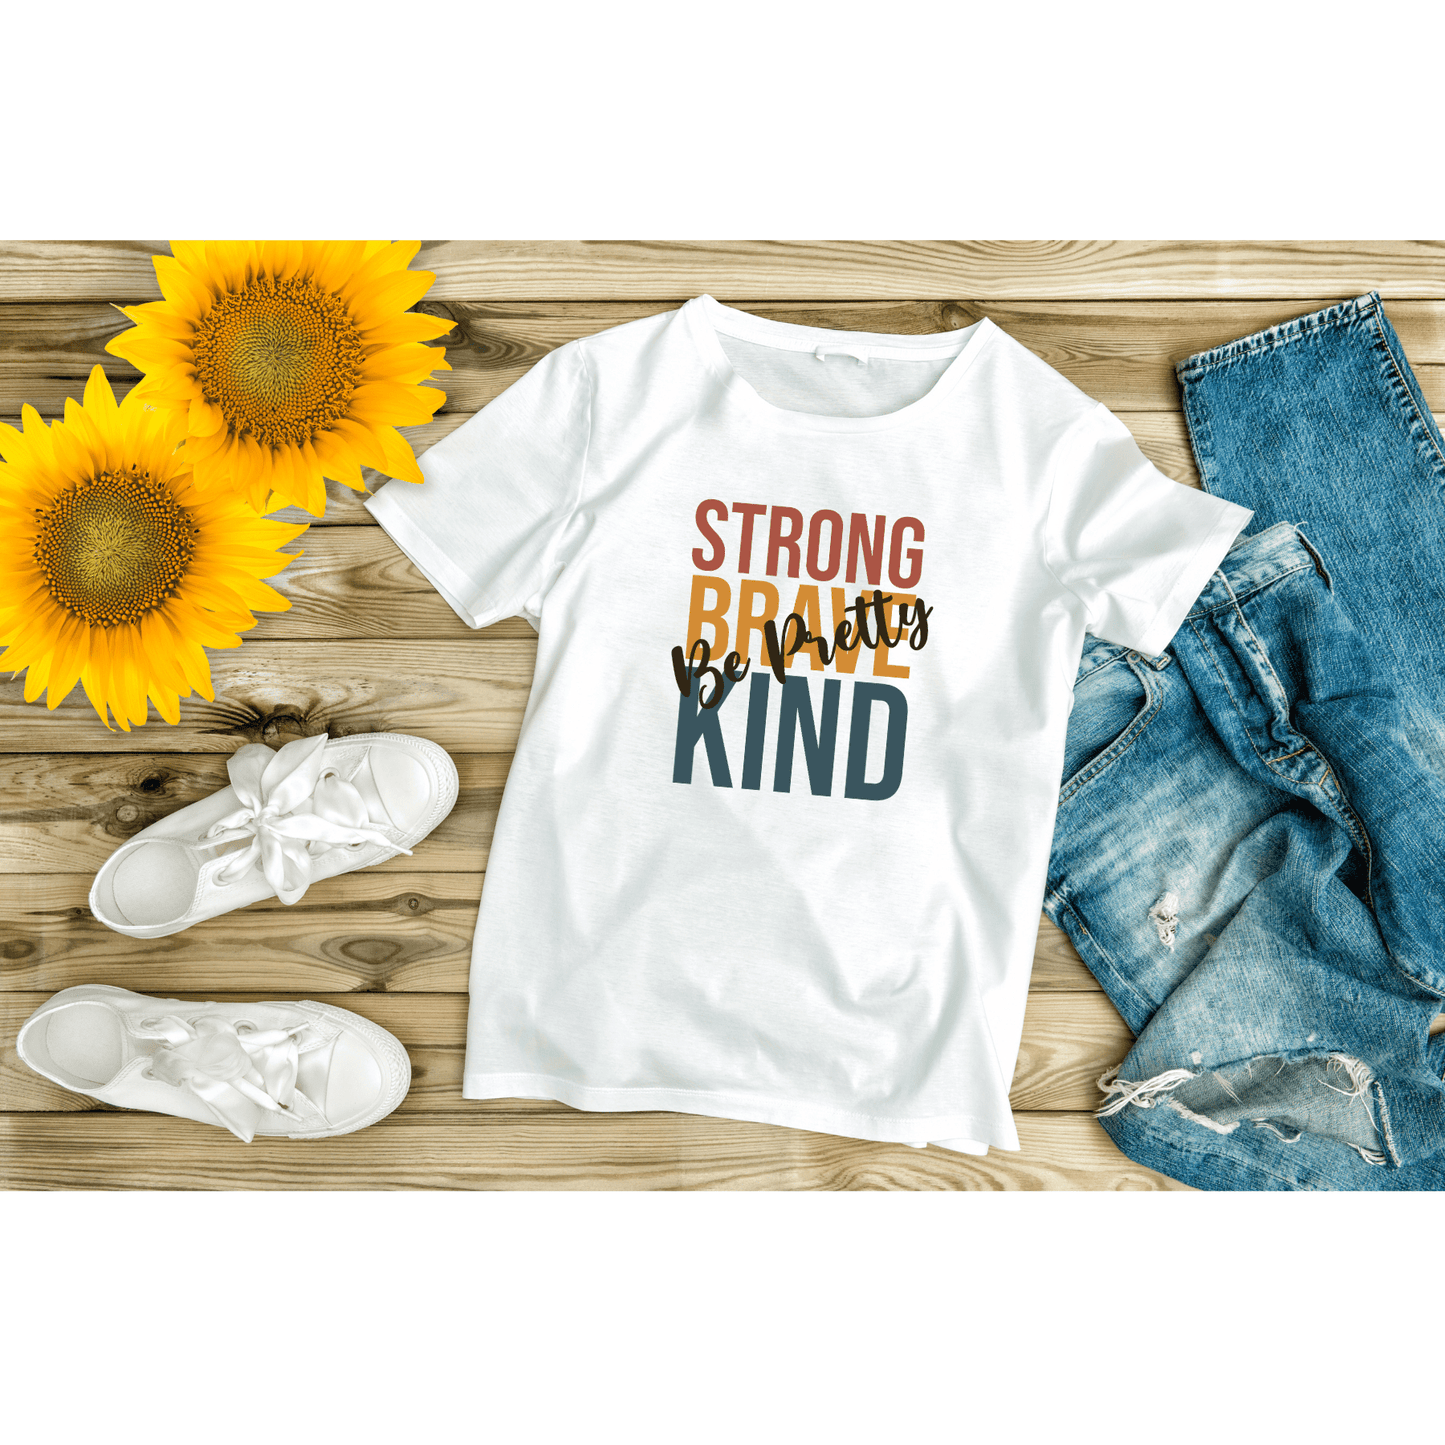 Be Pretty Strong Brave Kind (3 colors)